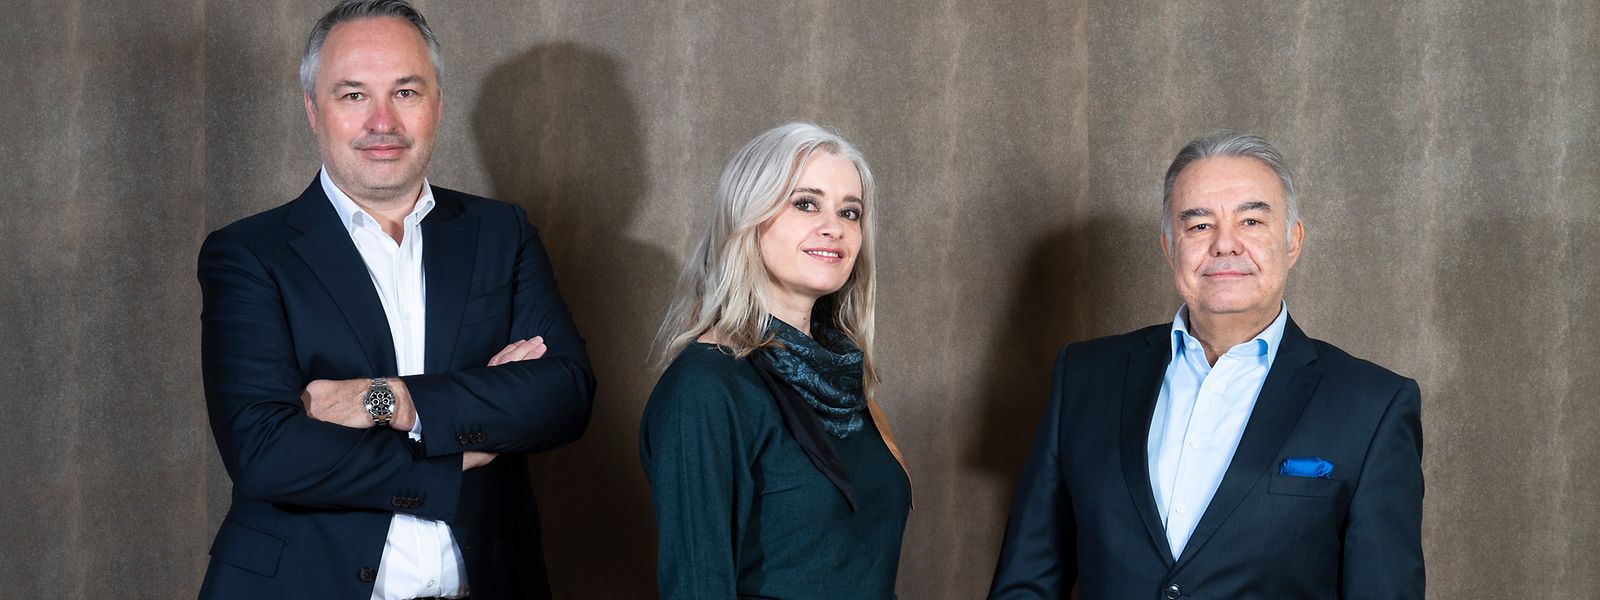 Laurent Heiliger, Managing Partner - Advisory, tax and accounting | Stéphanie Grisius, International Contact Partner - Advisory and regulated structures | Manuel Hack, Partner - Advisory, tax and accounting